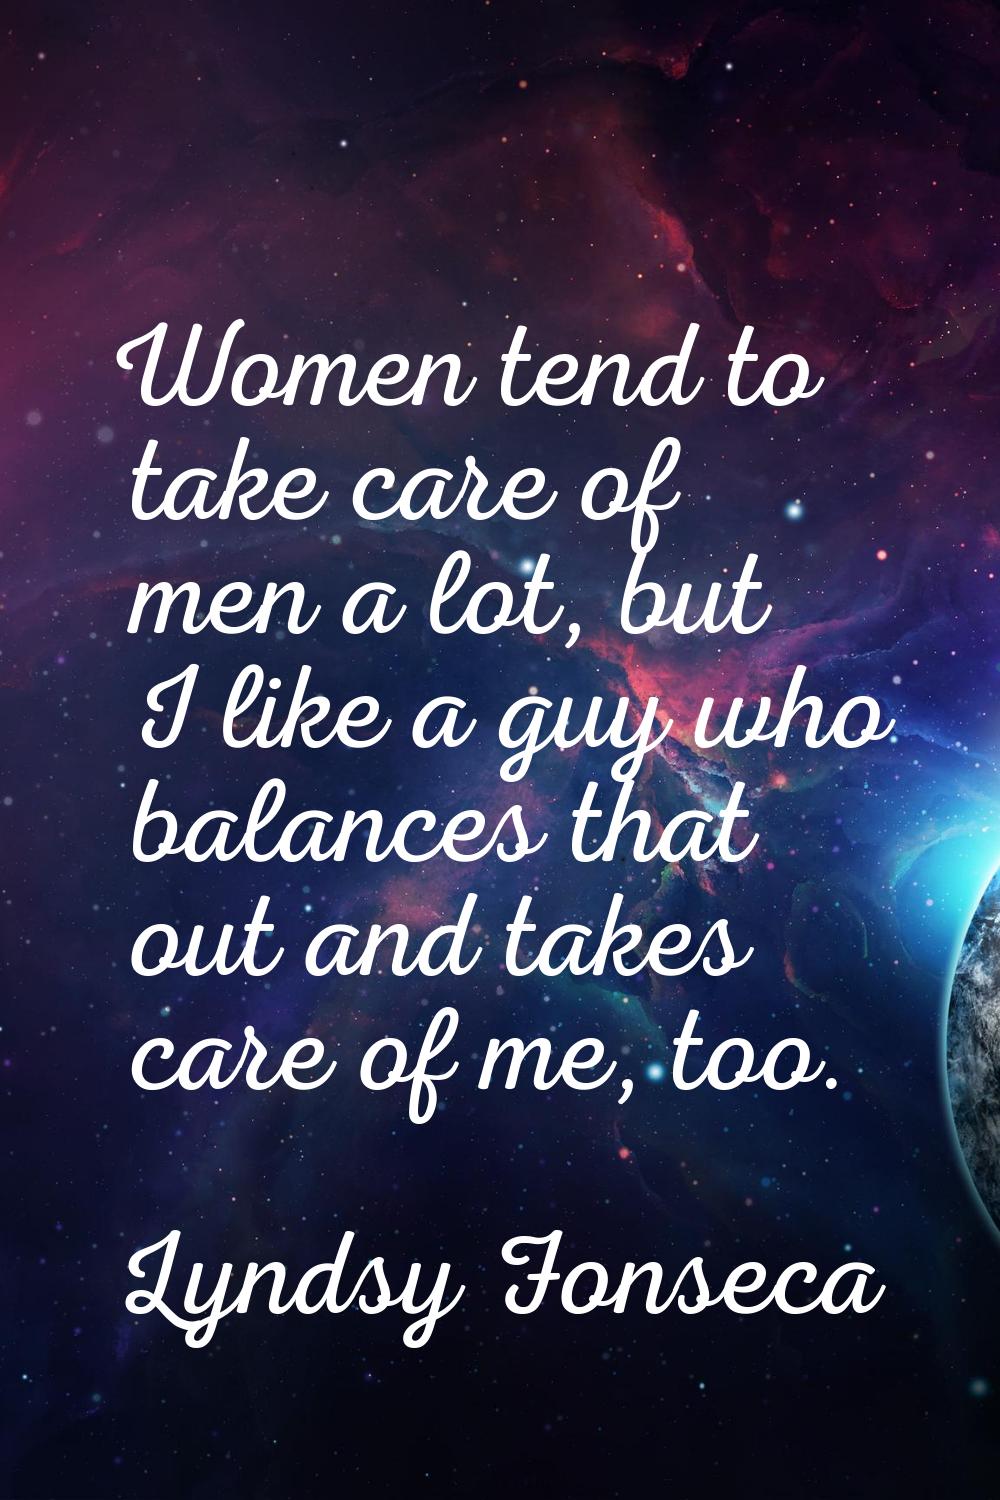 Women tend to take care of men a lot, but I like a guy who balances that out and takes care of me, 